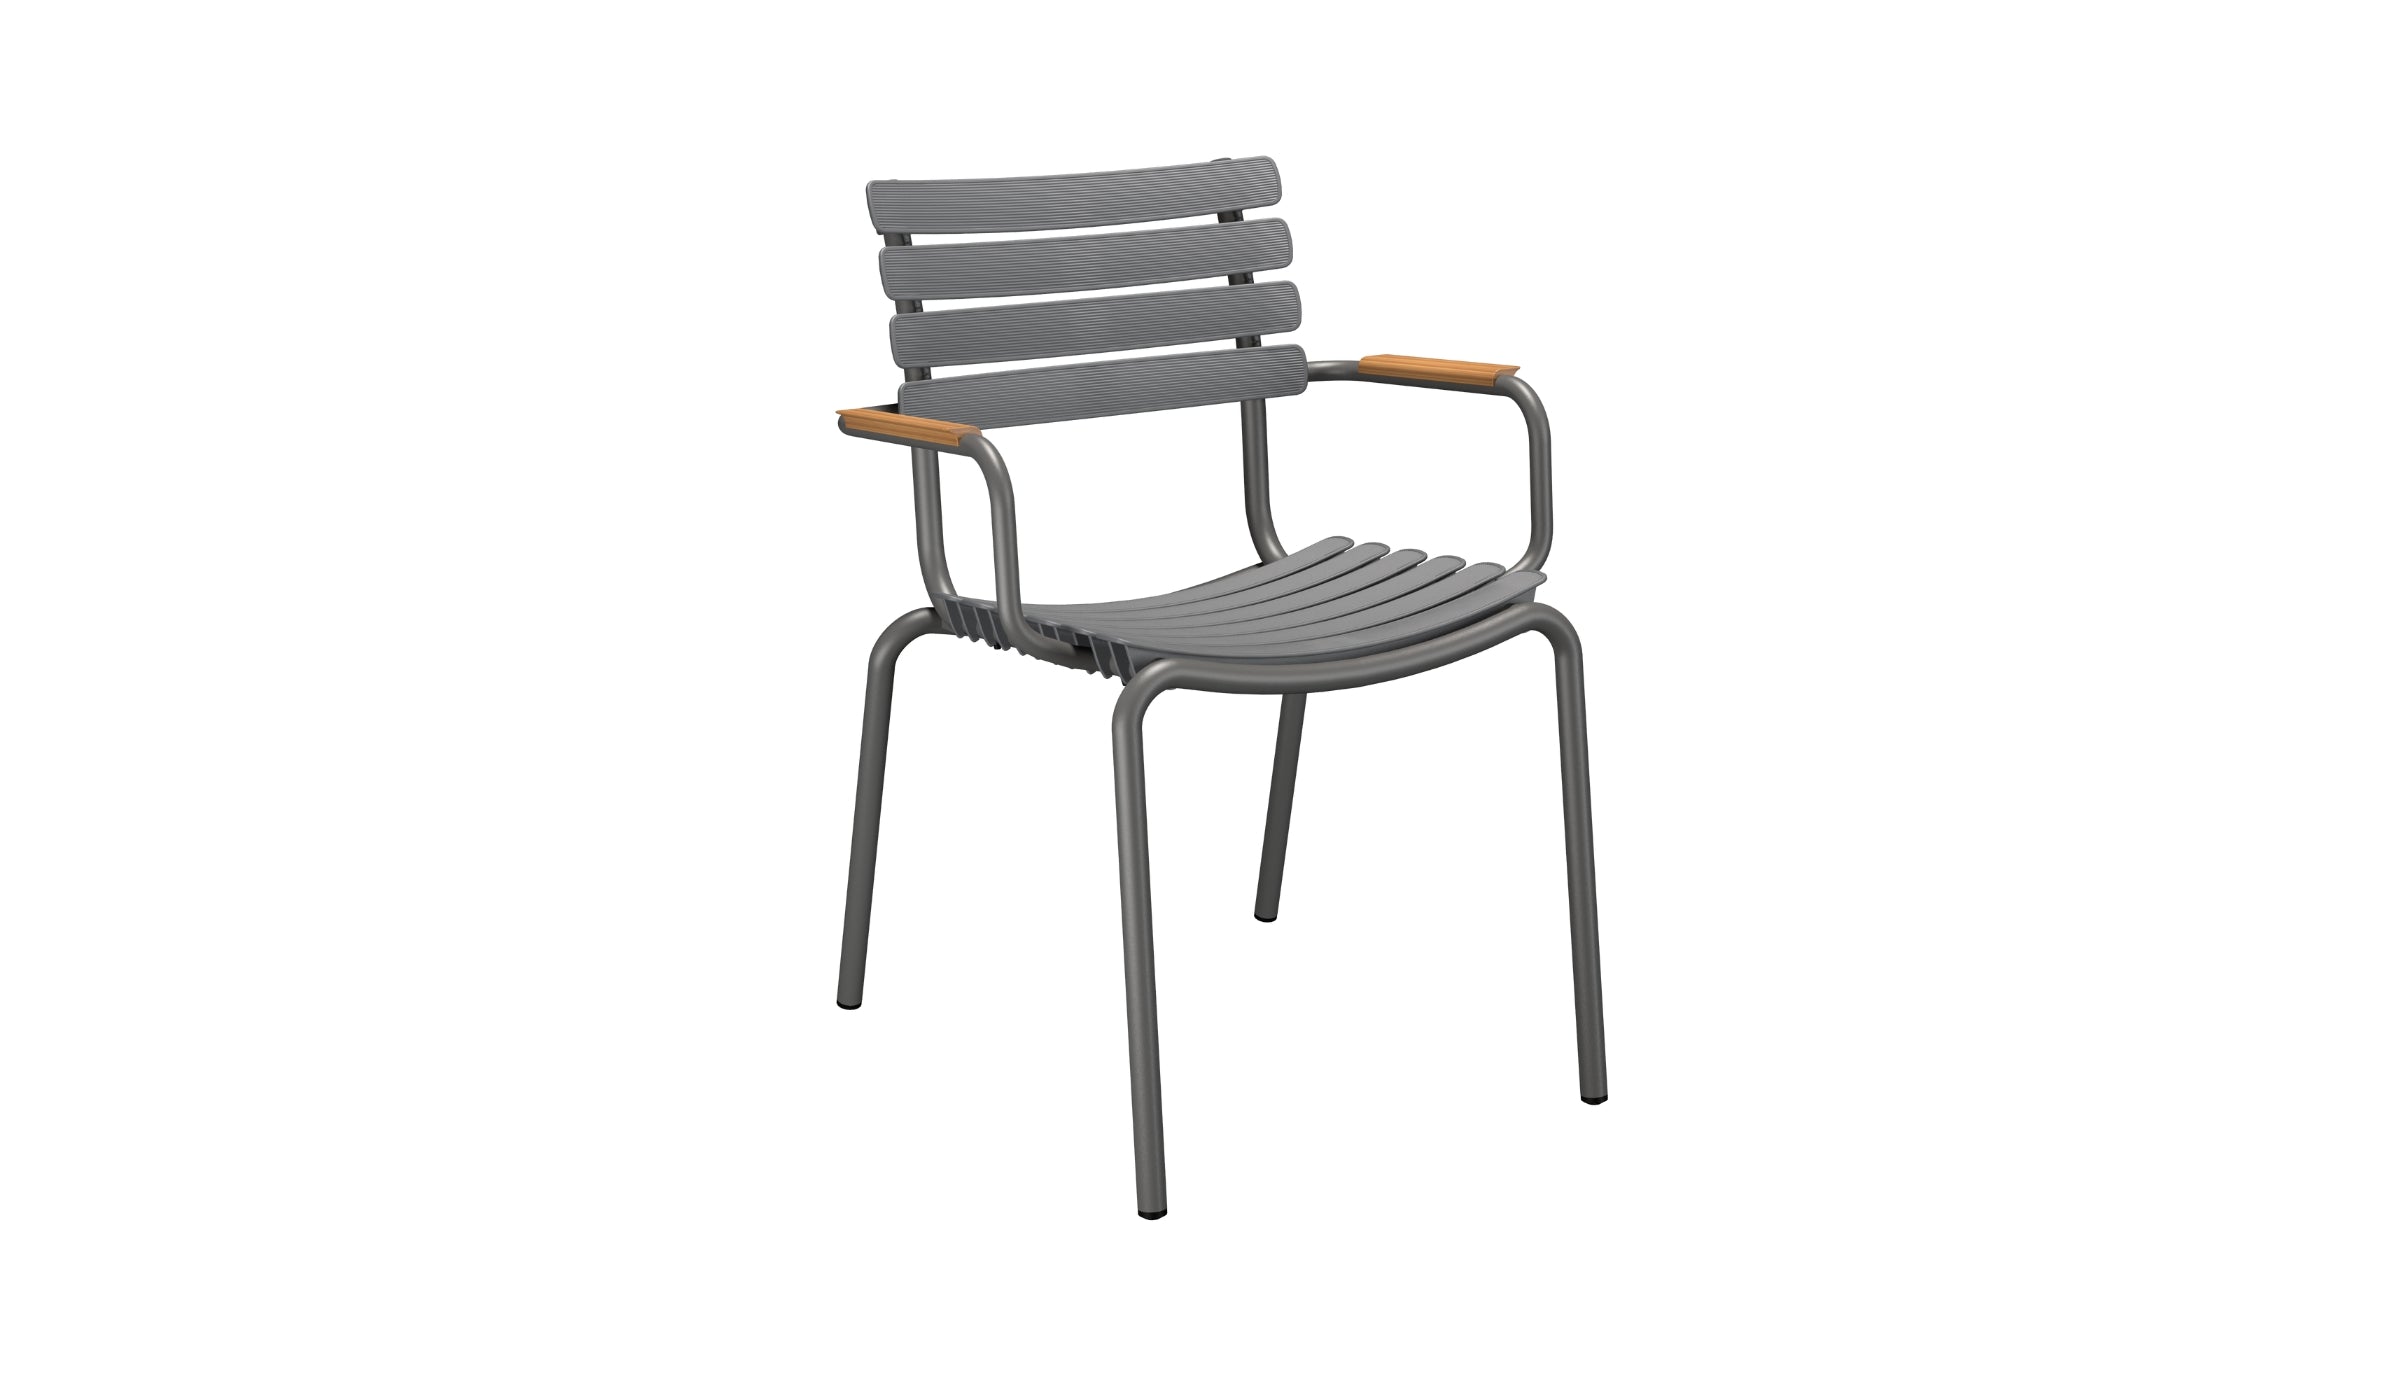 Reclips - Outdoor chair in aluminum and recycled plastic with bamboo armrests, gray